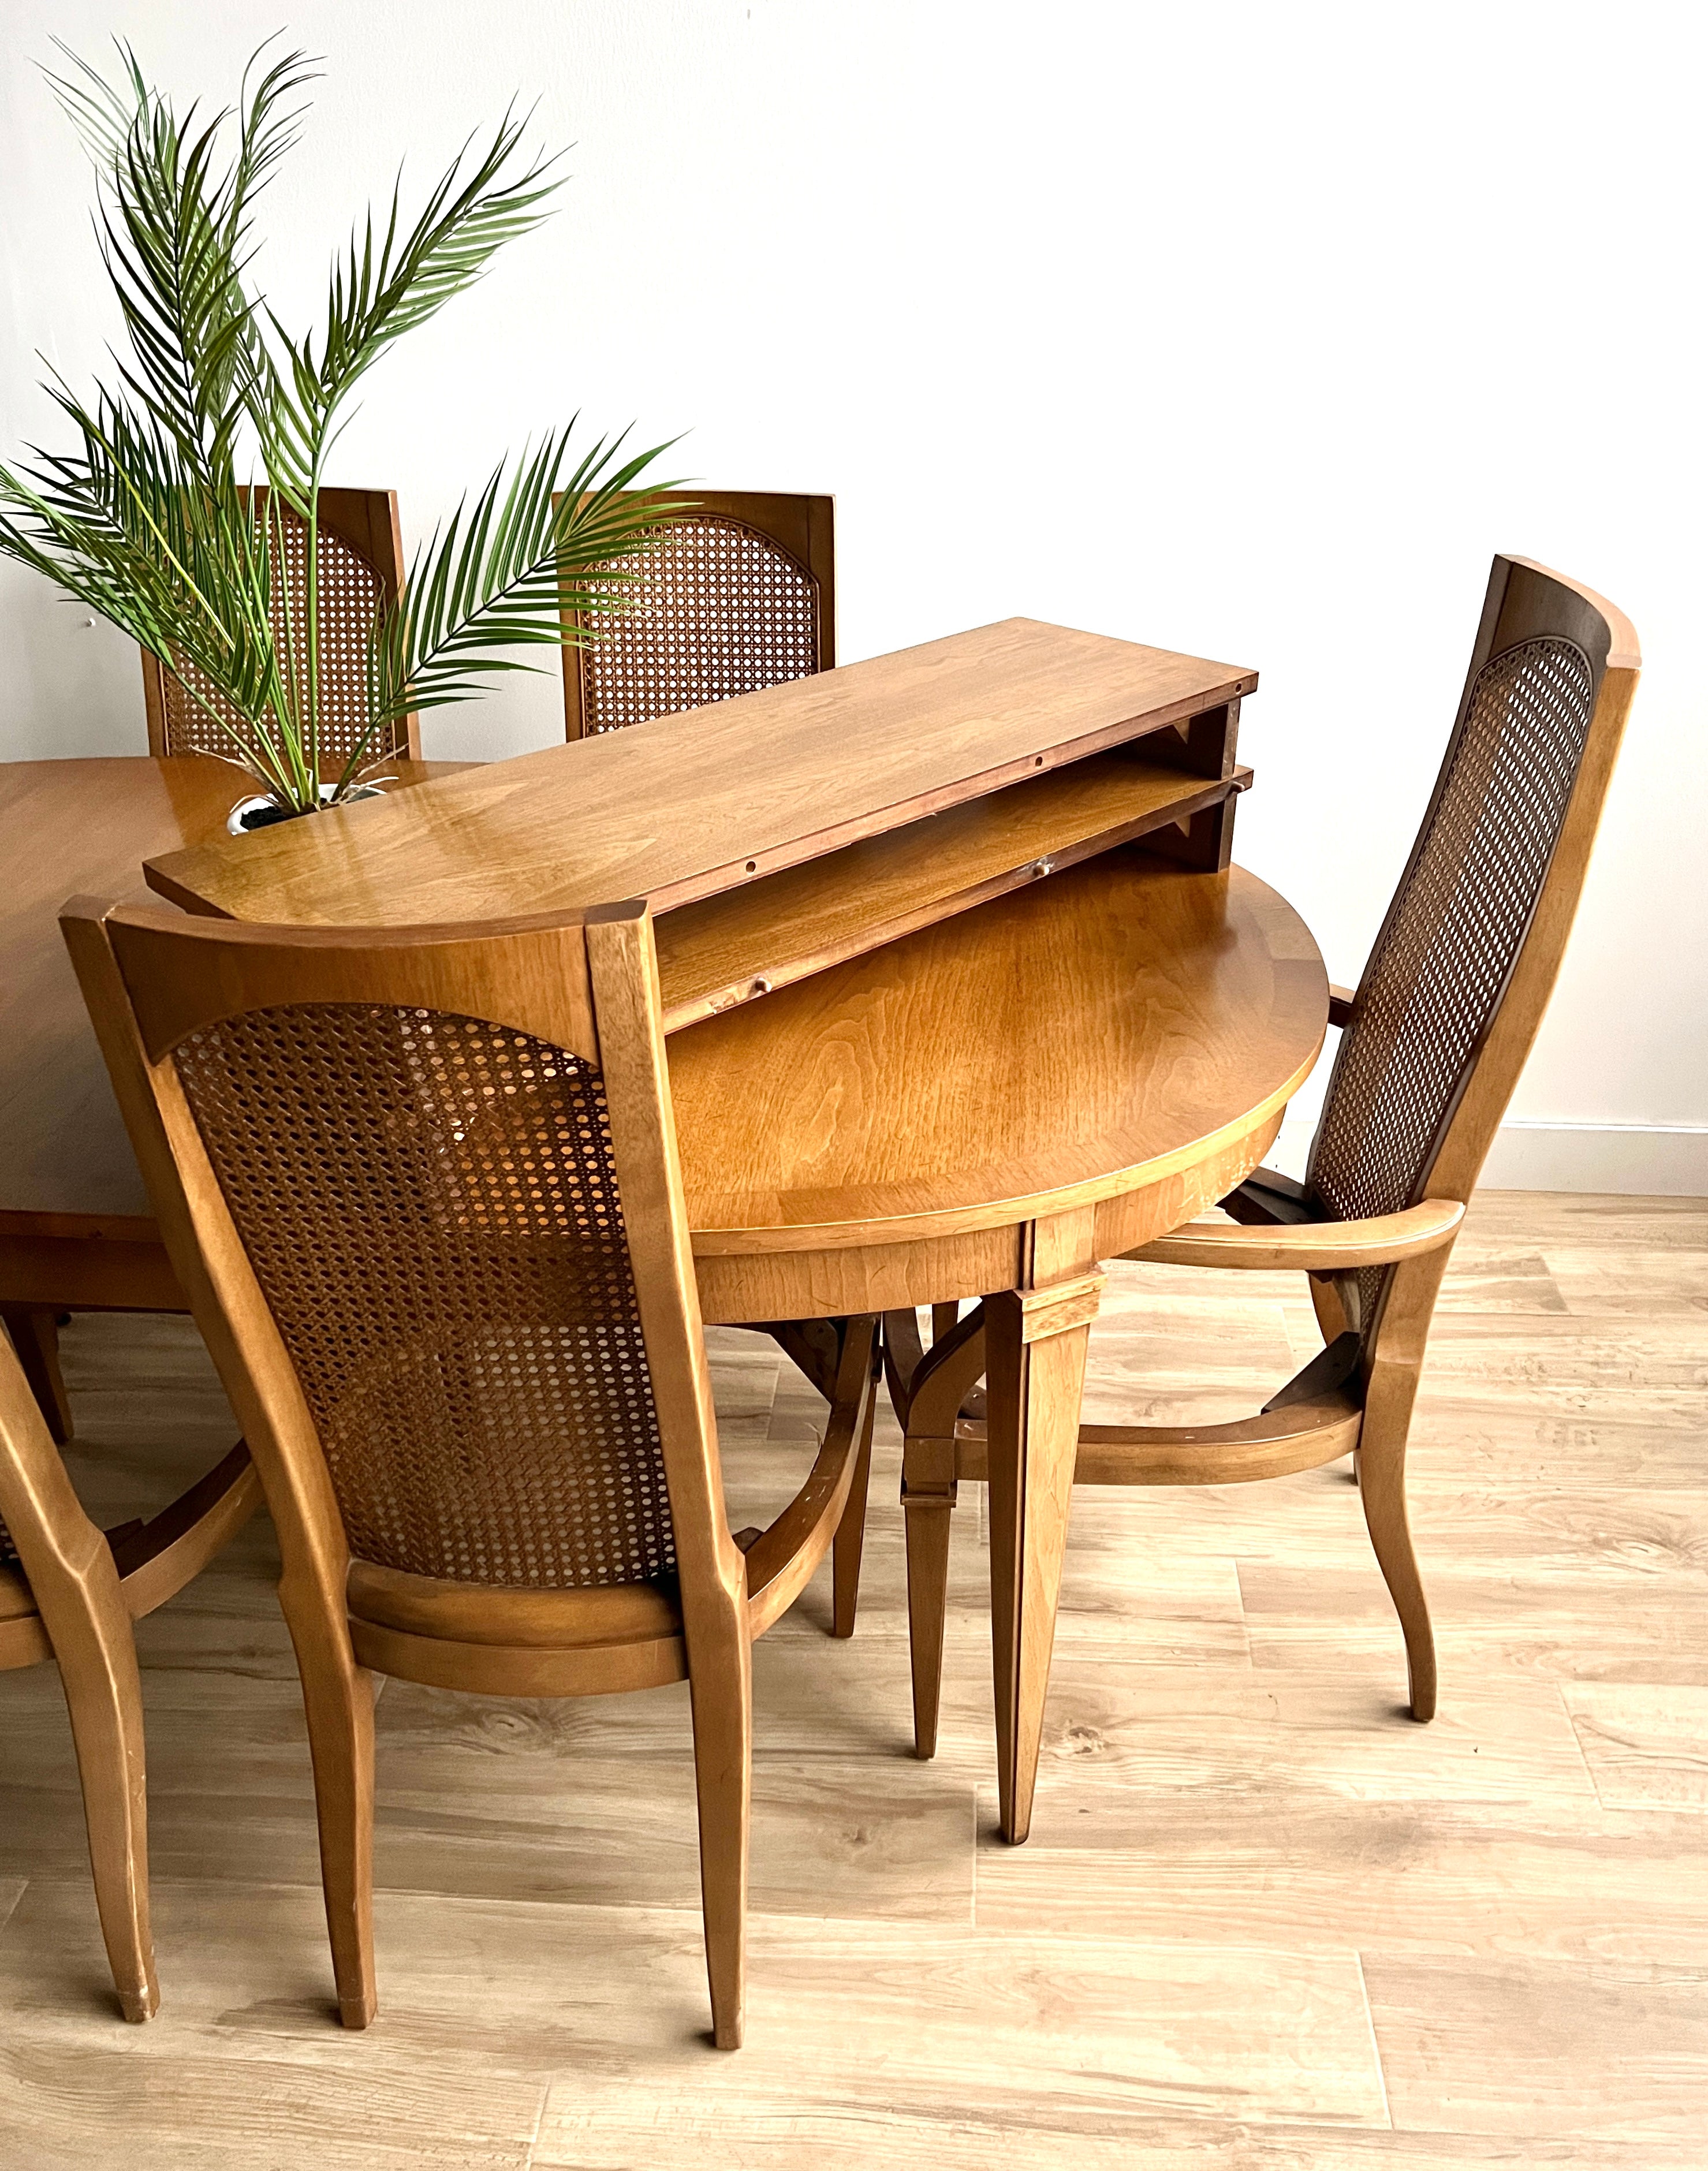 Vintage Caned Back Drexel Dining Set with 6 Chairs + 3 Leaves in Your Choice of Fabric